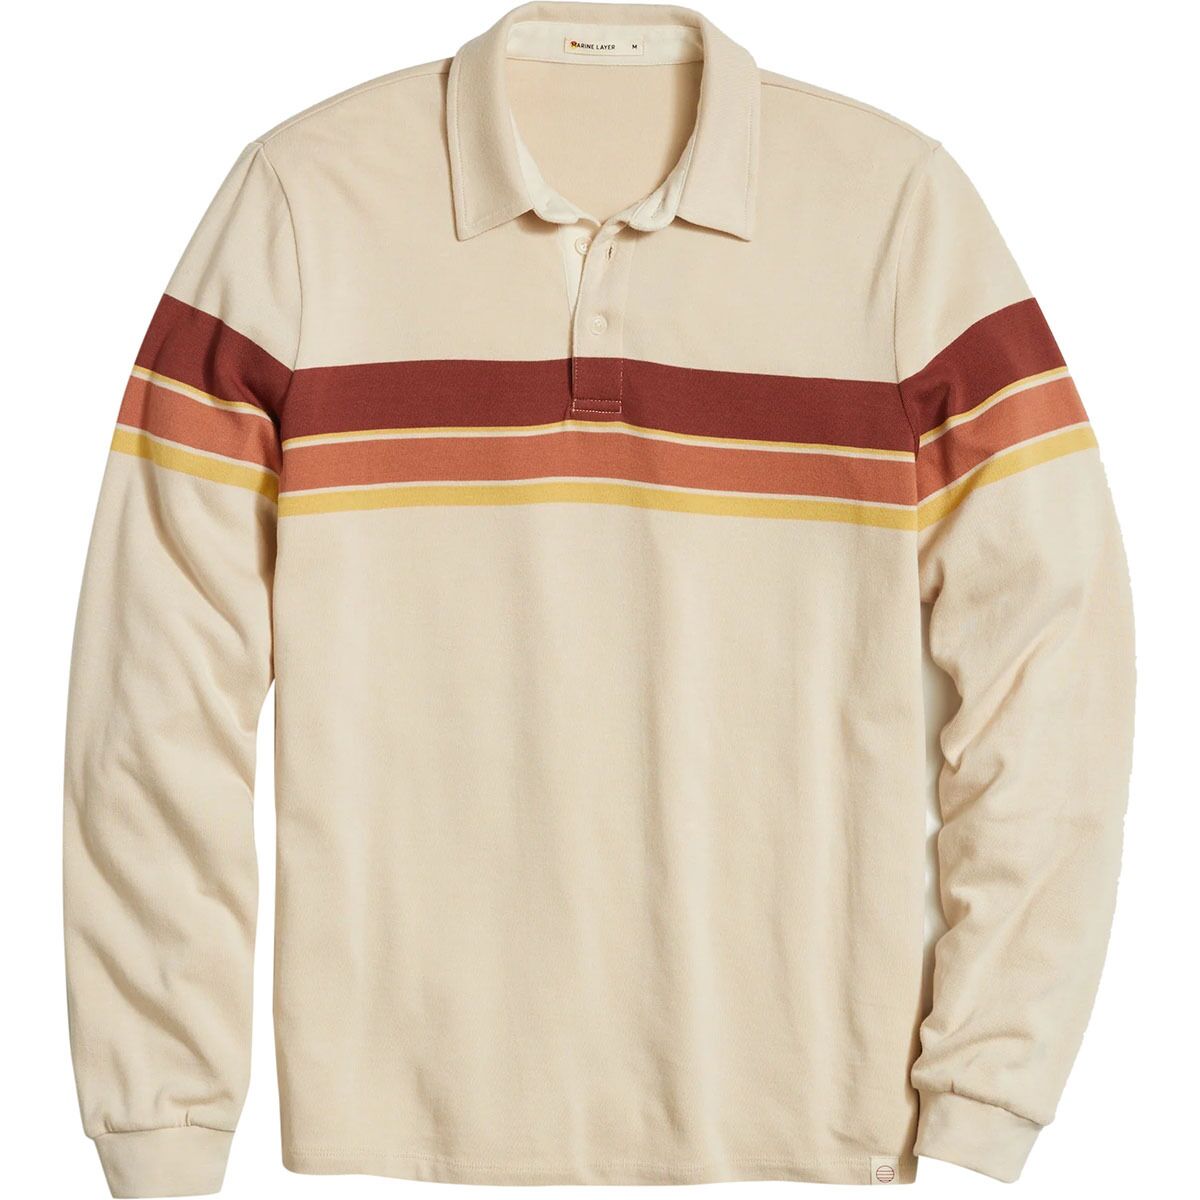 Marine Layer Long-Sleeve Rugby Polo - Men's